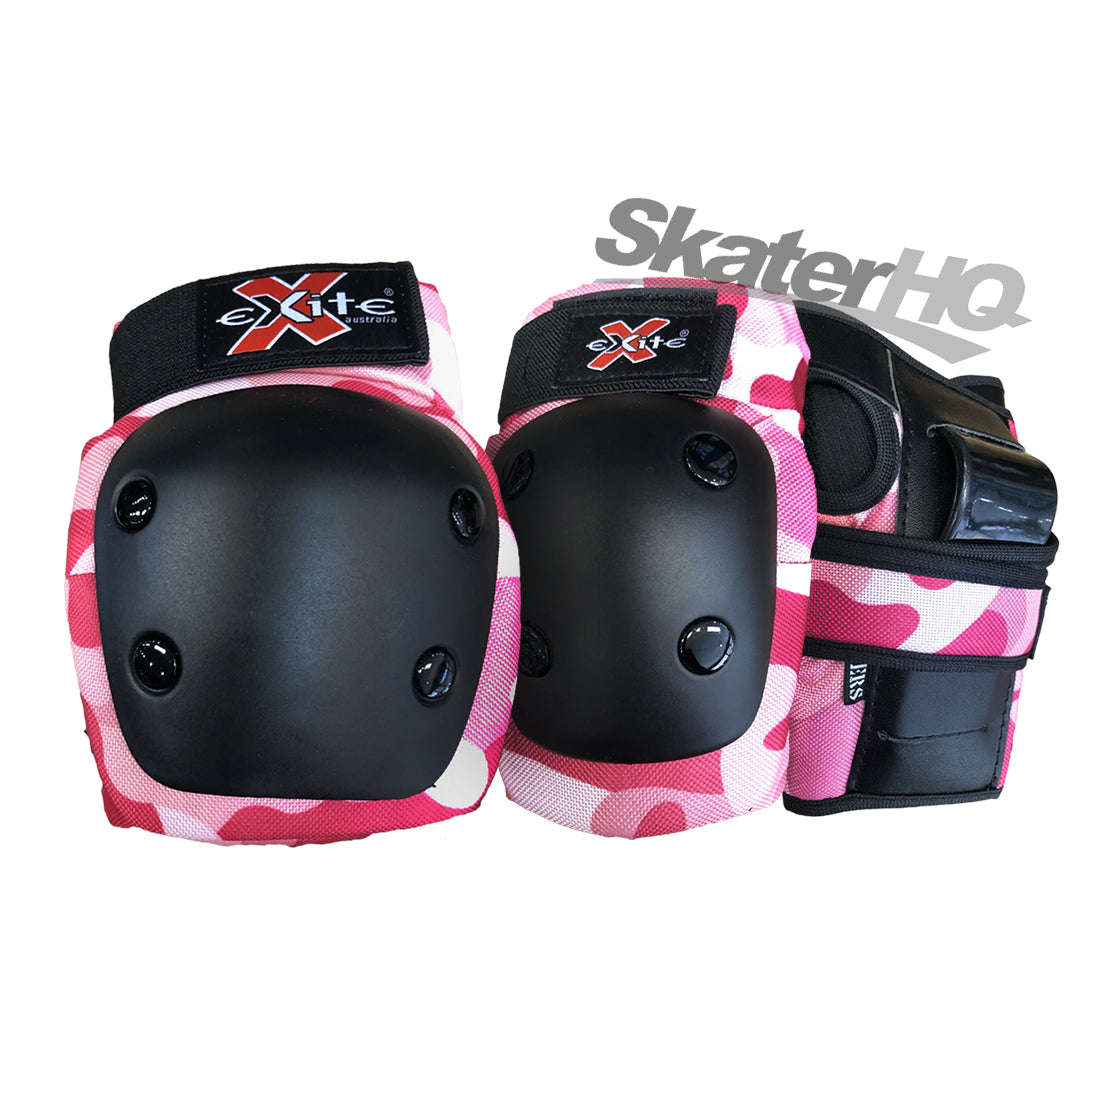 Exite Critters Tripack - Camo Pink - Youth Medium Protective Gear